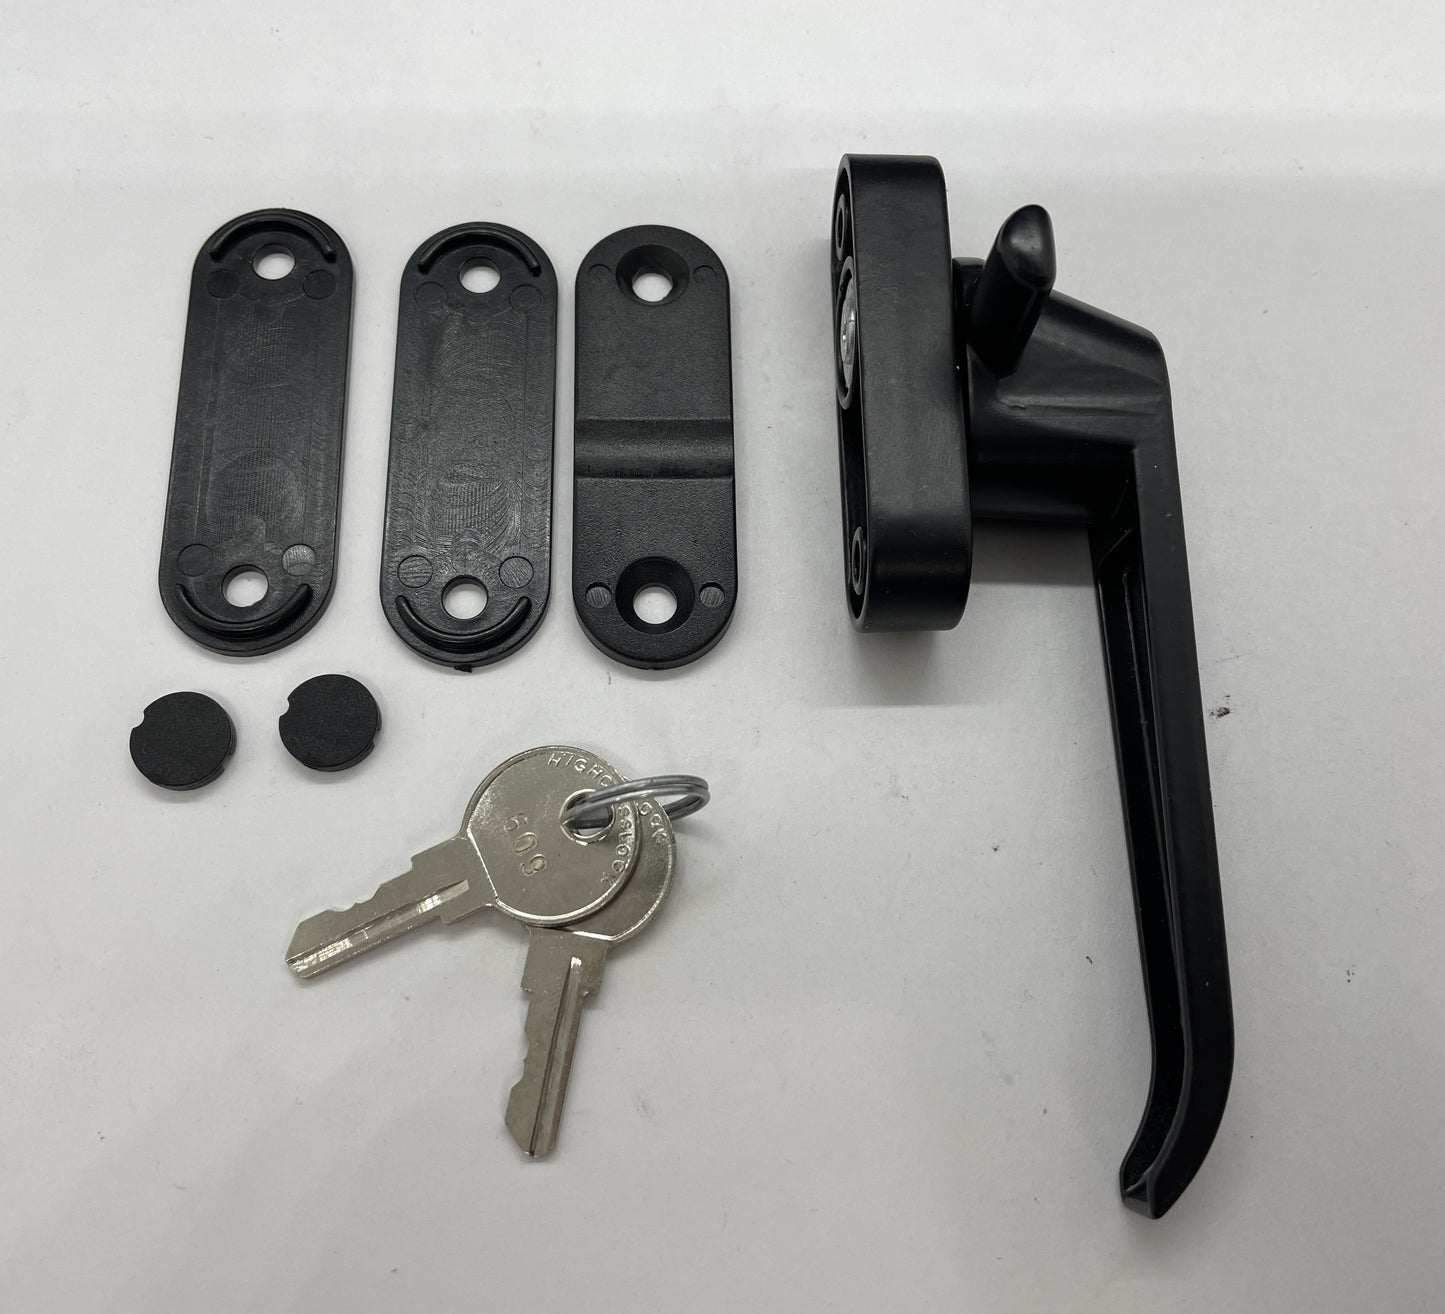 CAM handle for awning or casement window - black - keyed